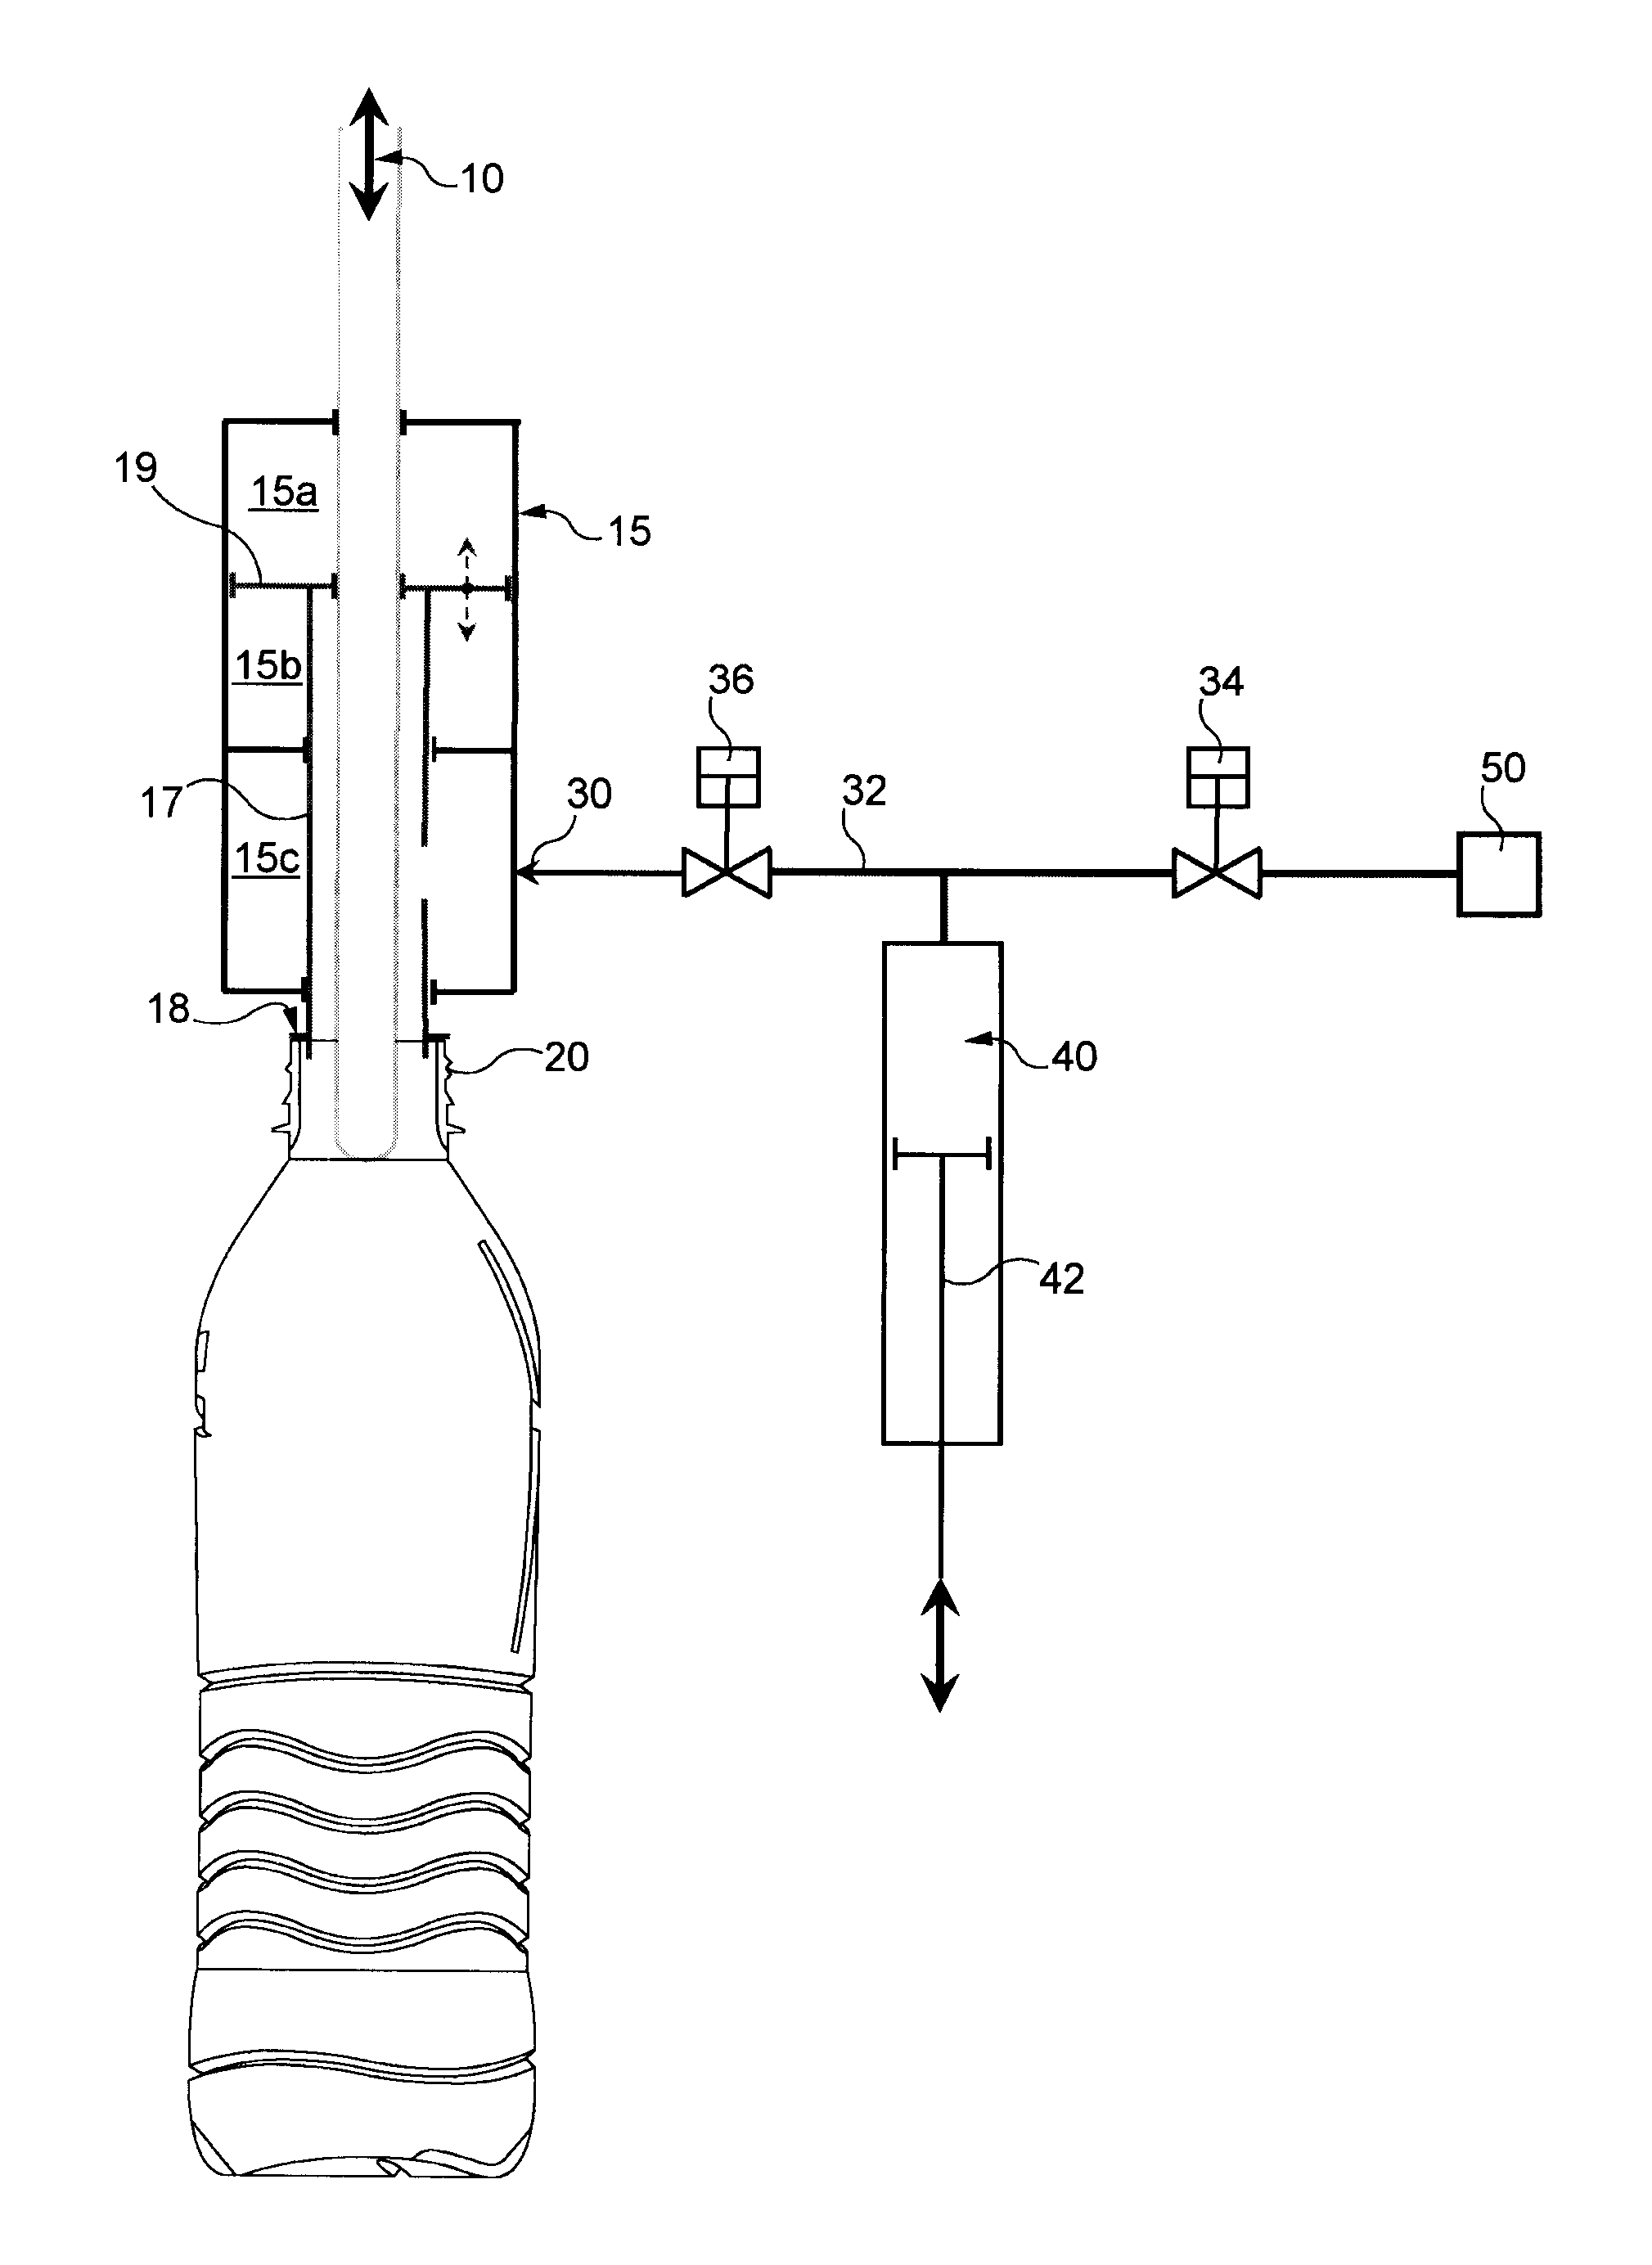 Device for packaging a liquid food product